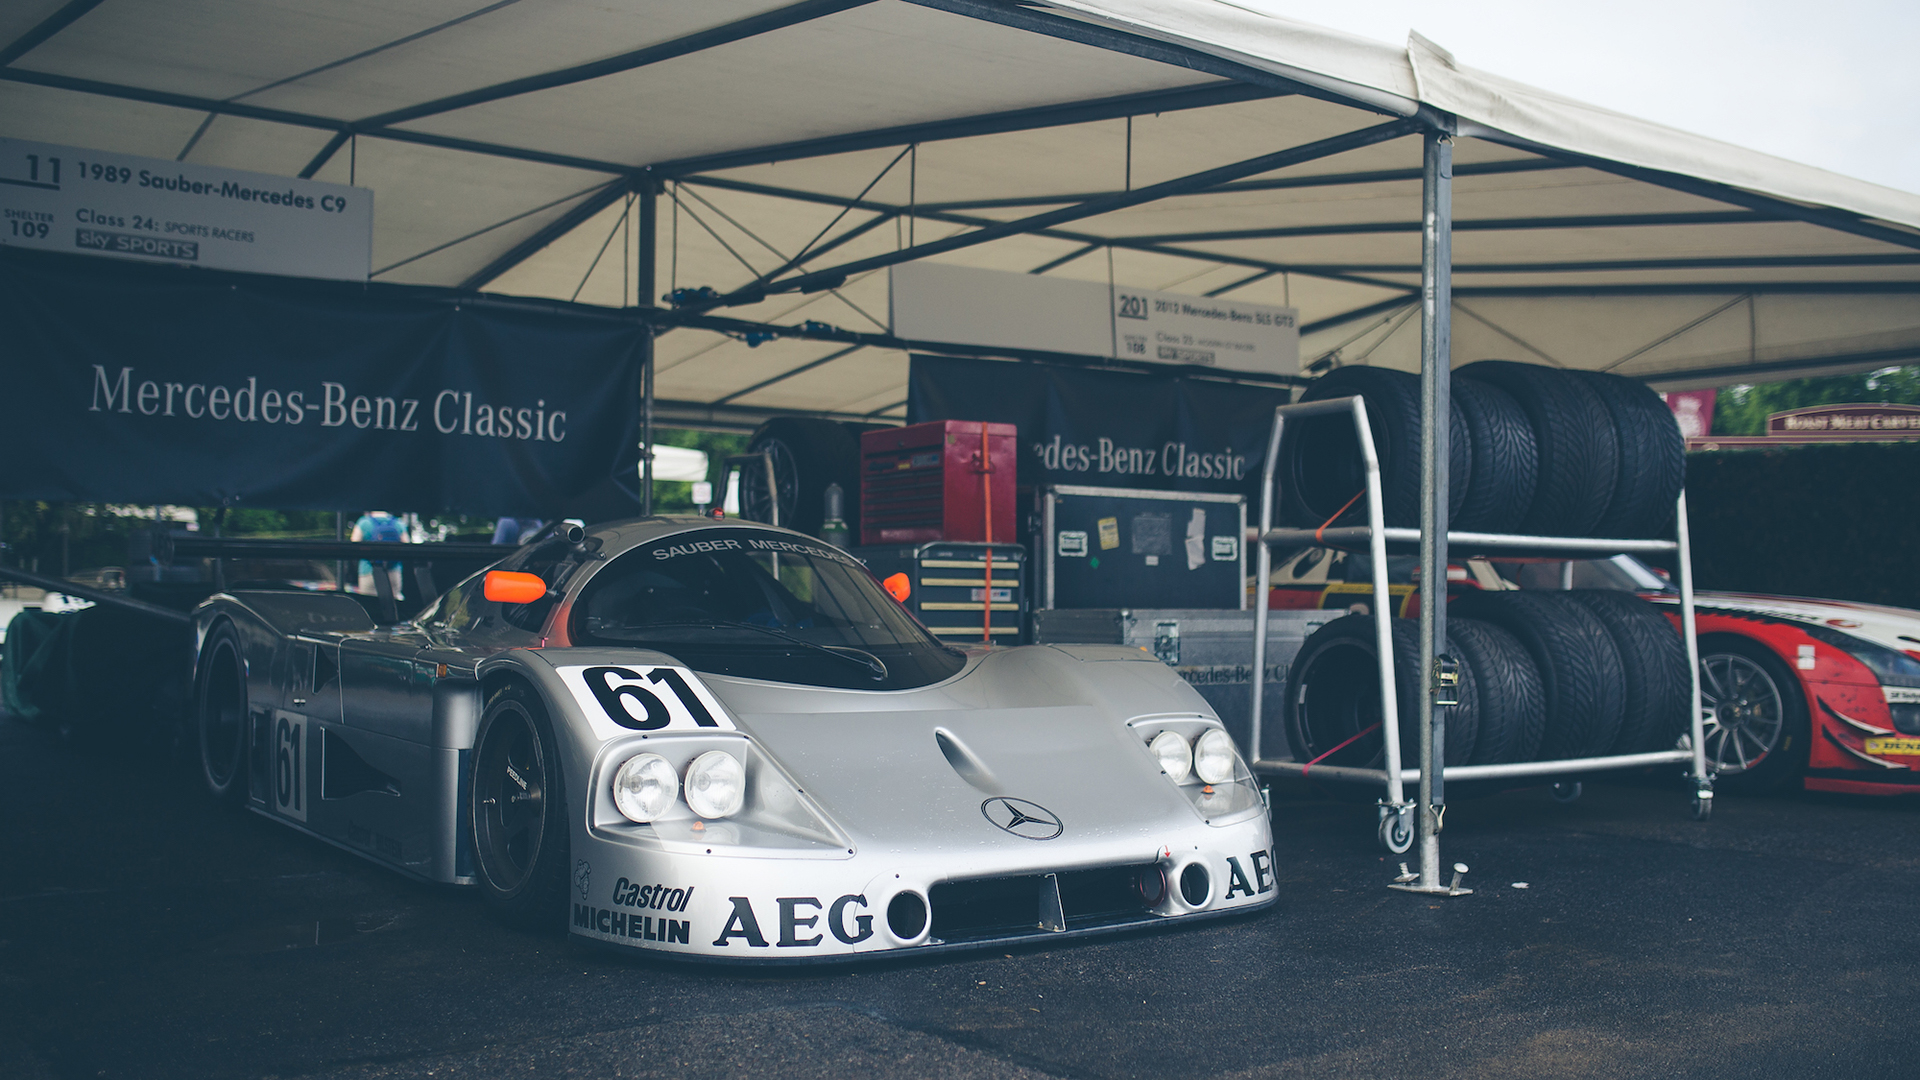 A Le Mans Sauber-Mercedes like the ones Michael Schumacher ran at the time (@fosgoodwood)